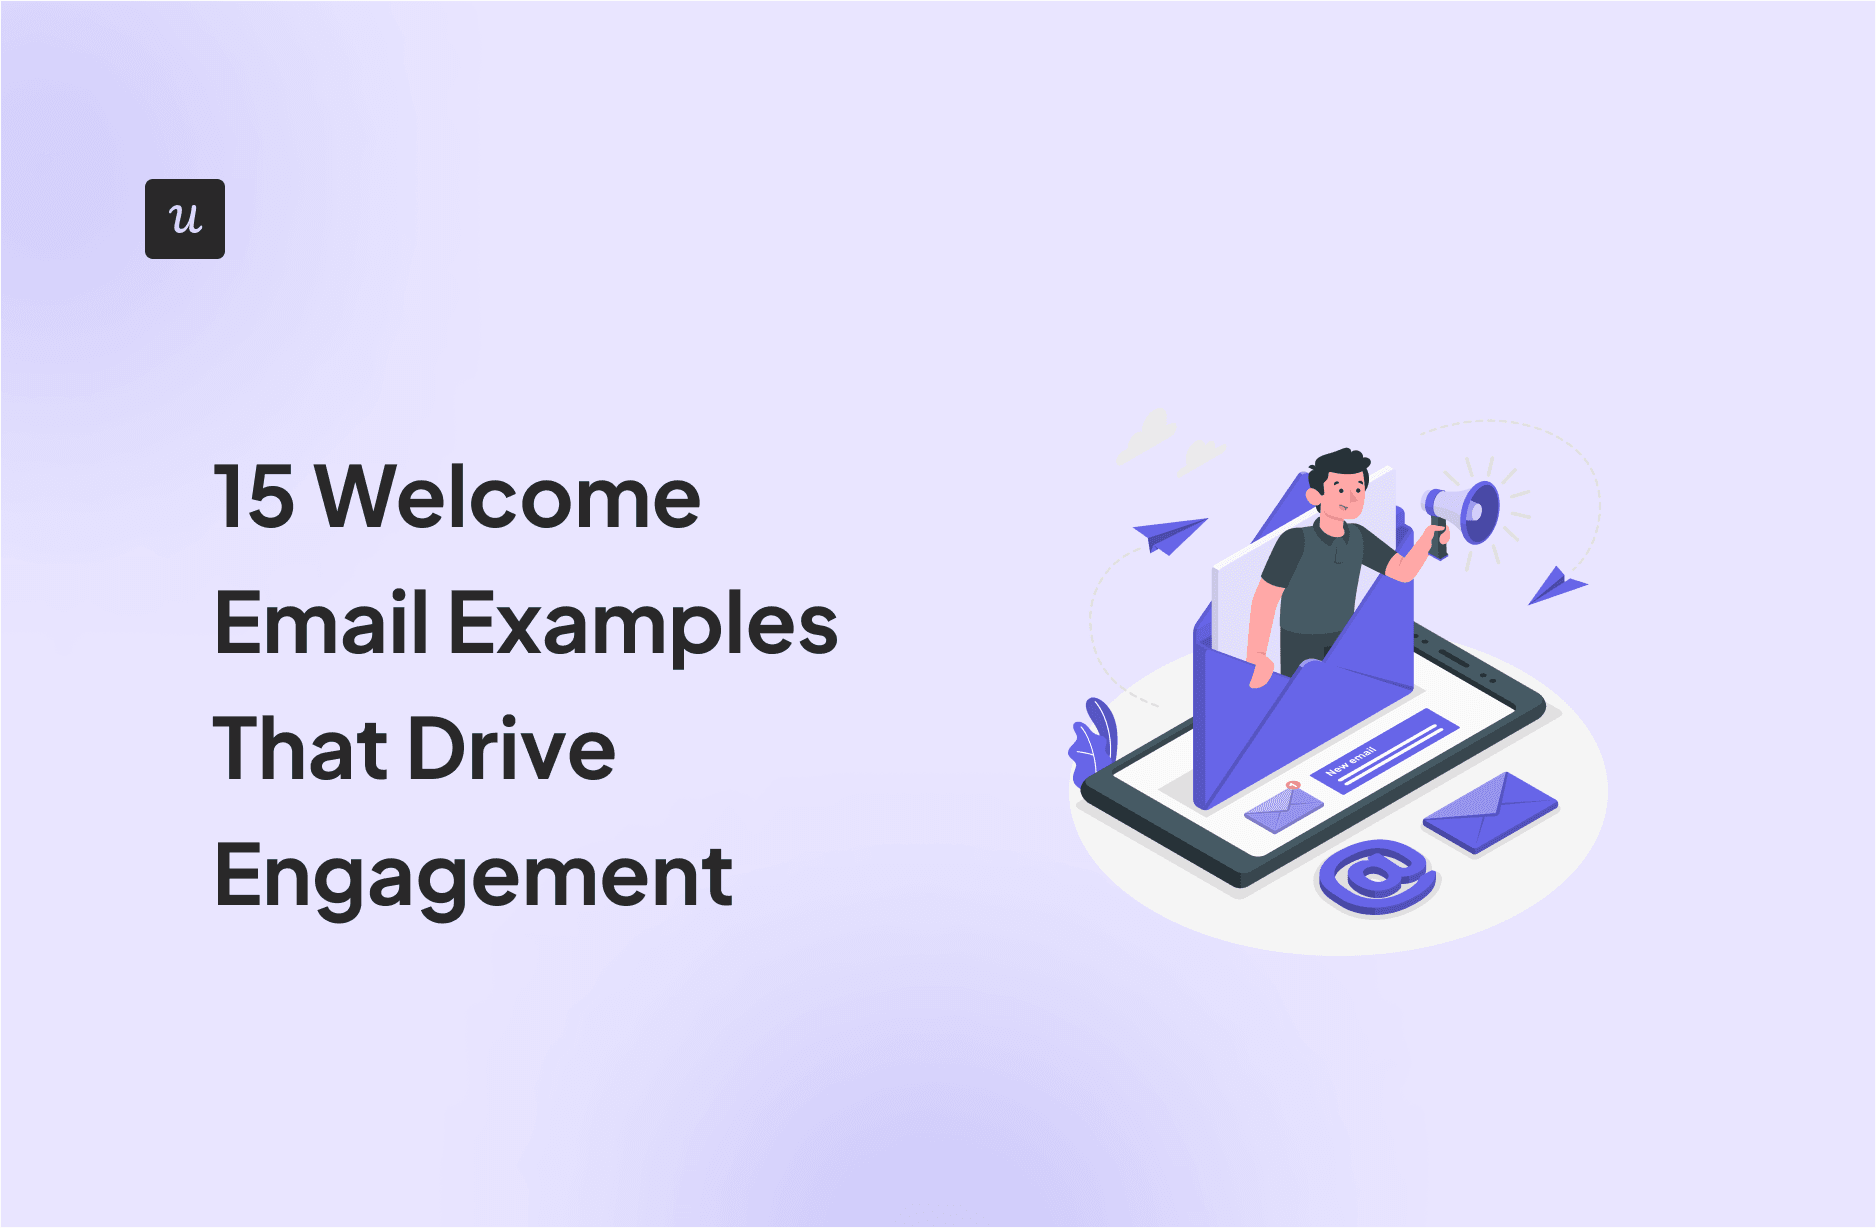 15 Welcome Email Examples That Drive Engagement cover